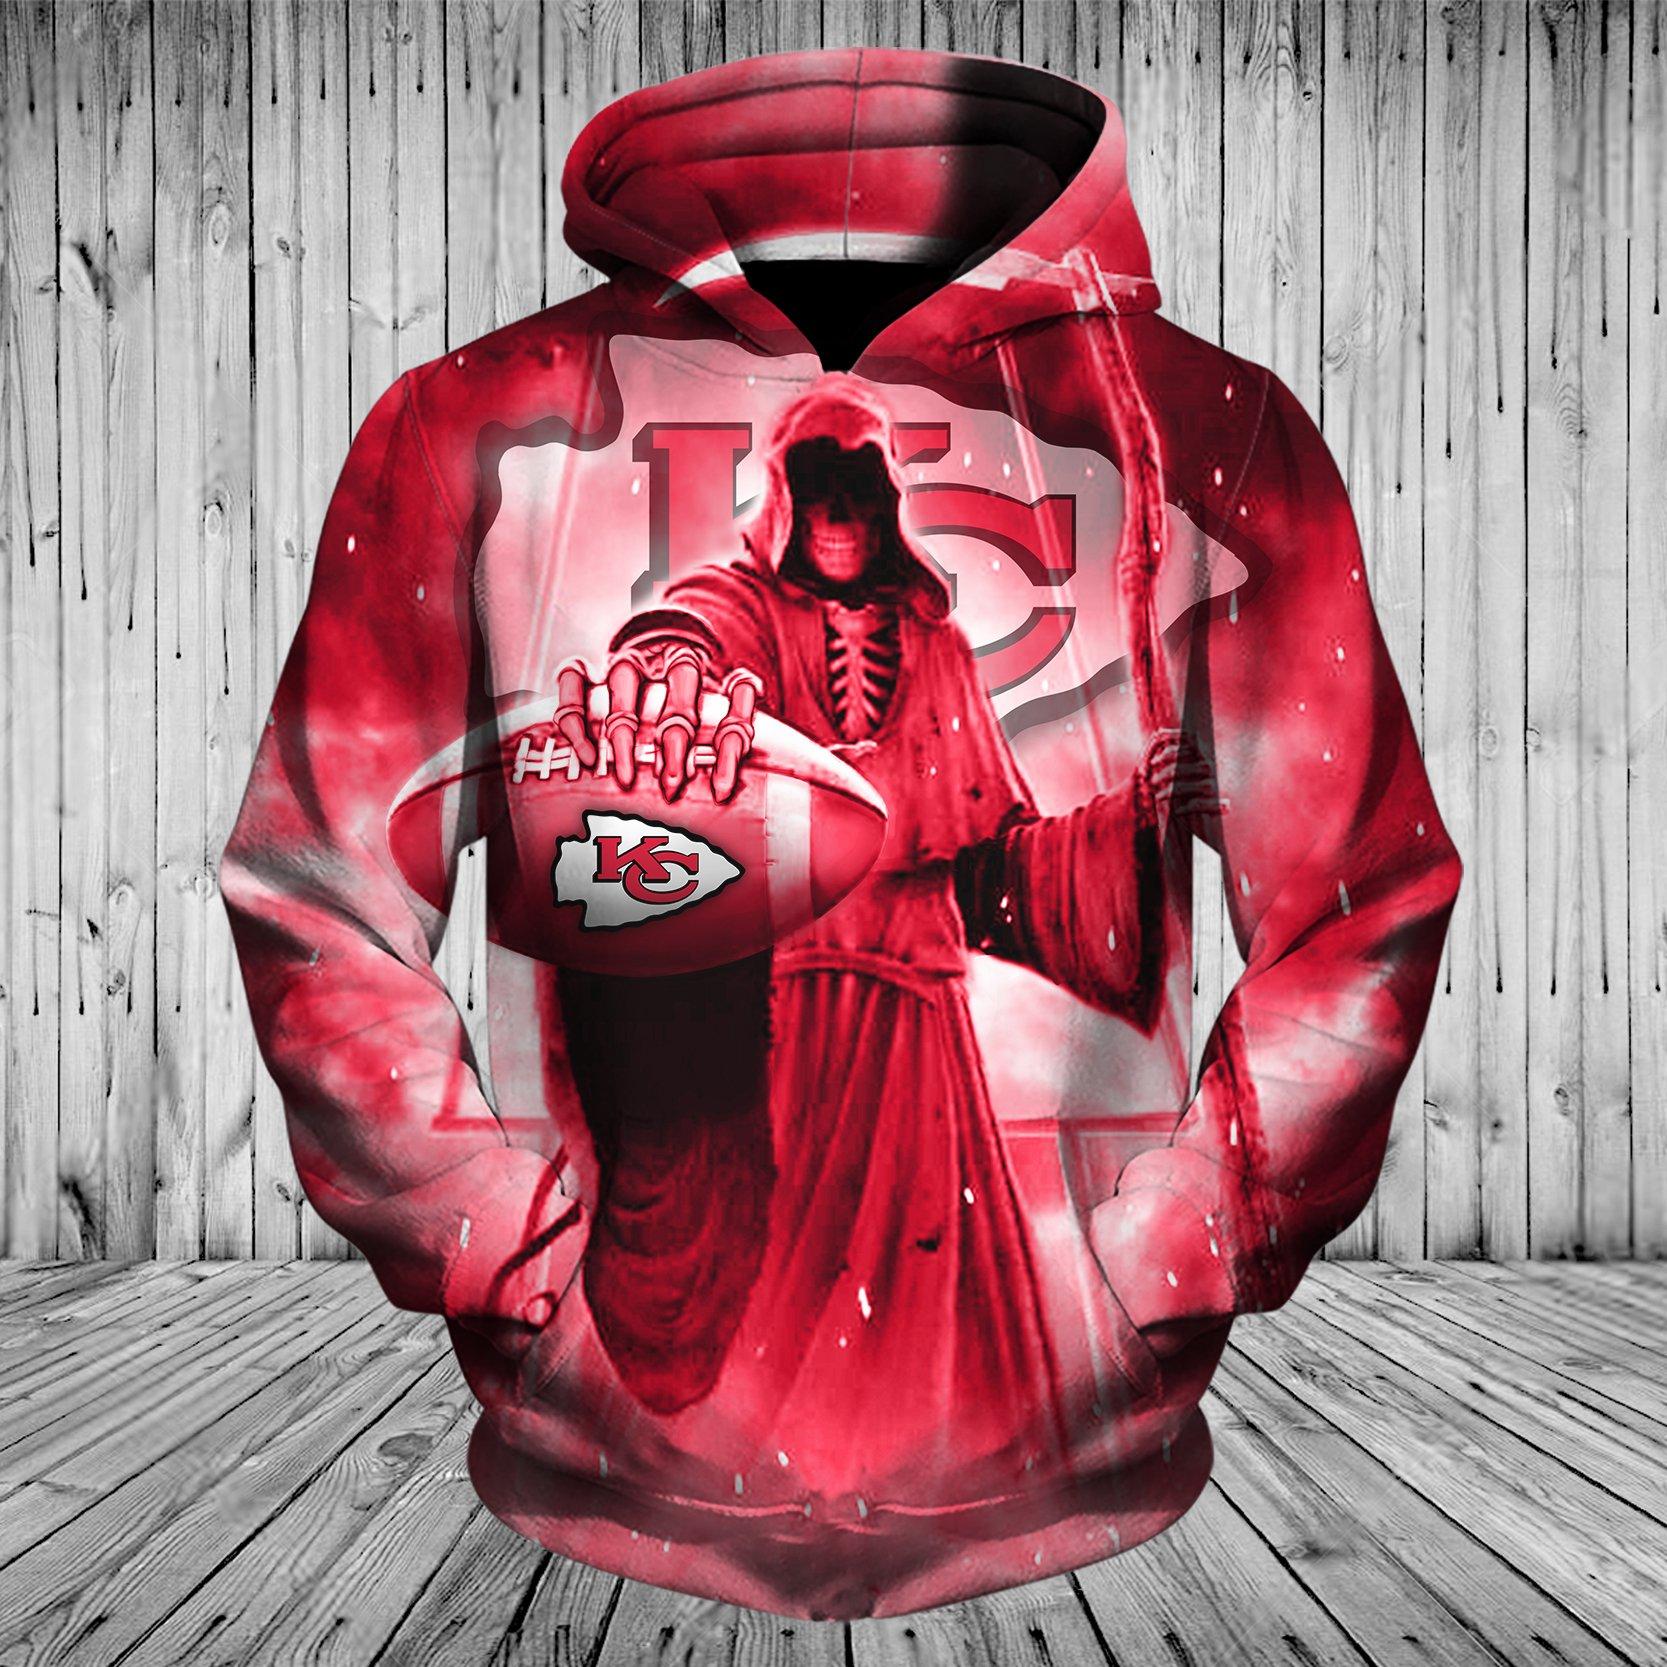 kansas city chiefs limited edition all over print full 3d hoodie adult sizes s 5xl gts005493 n8fot